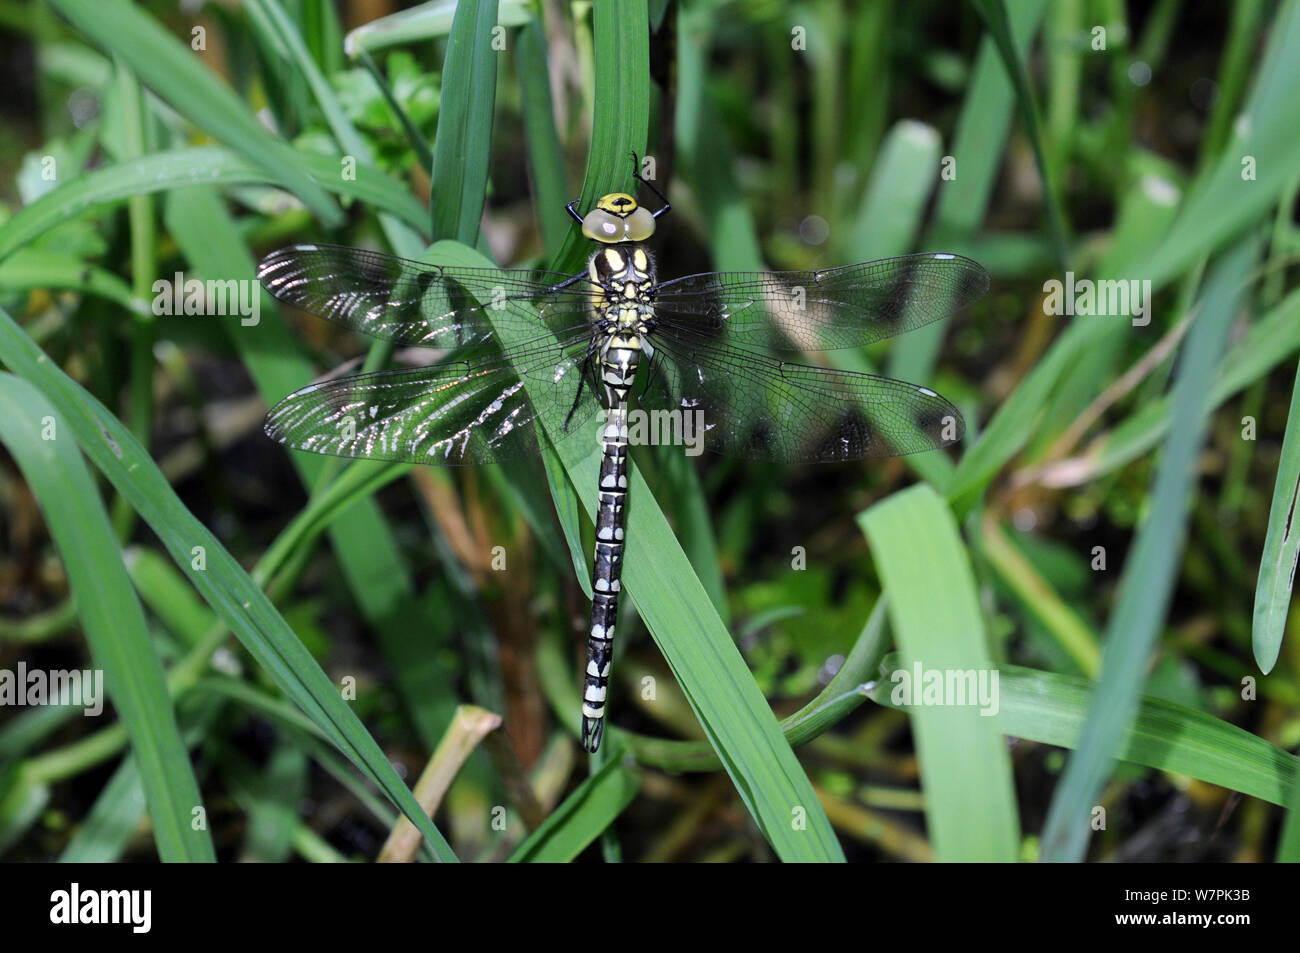 Southern Hawker (Aeshna cyanea) teneral male resting on flote-grass (Glyceria fluitans), Herefordshire, UK Stock Photo